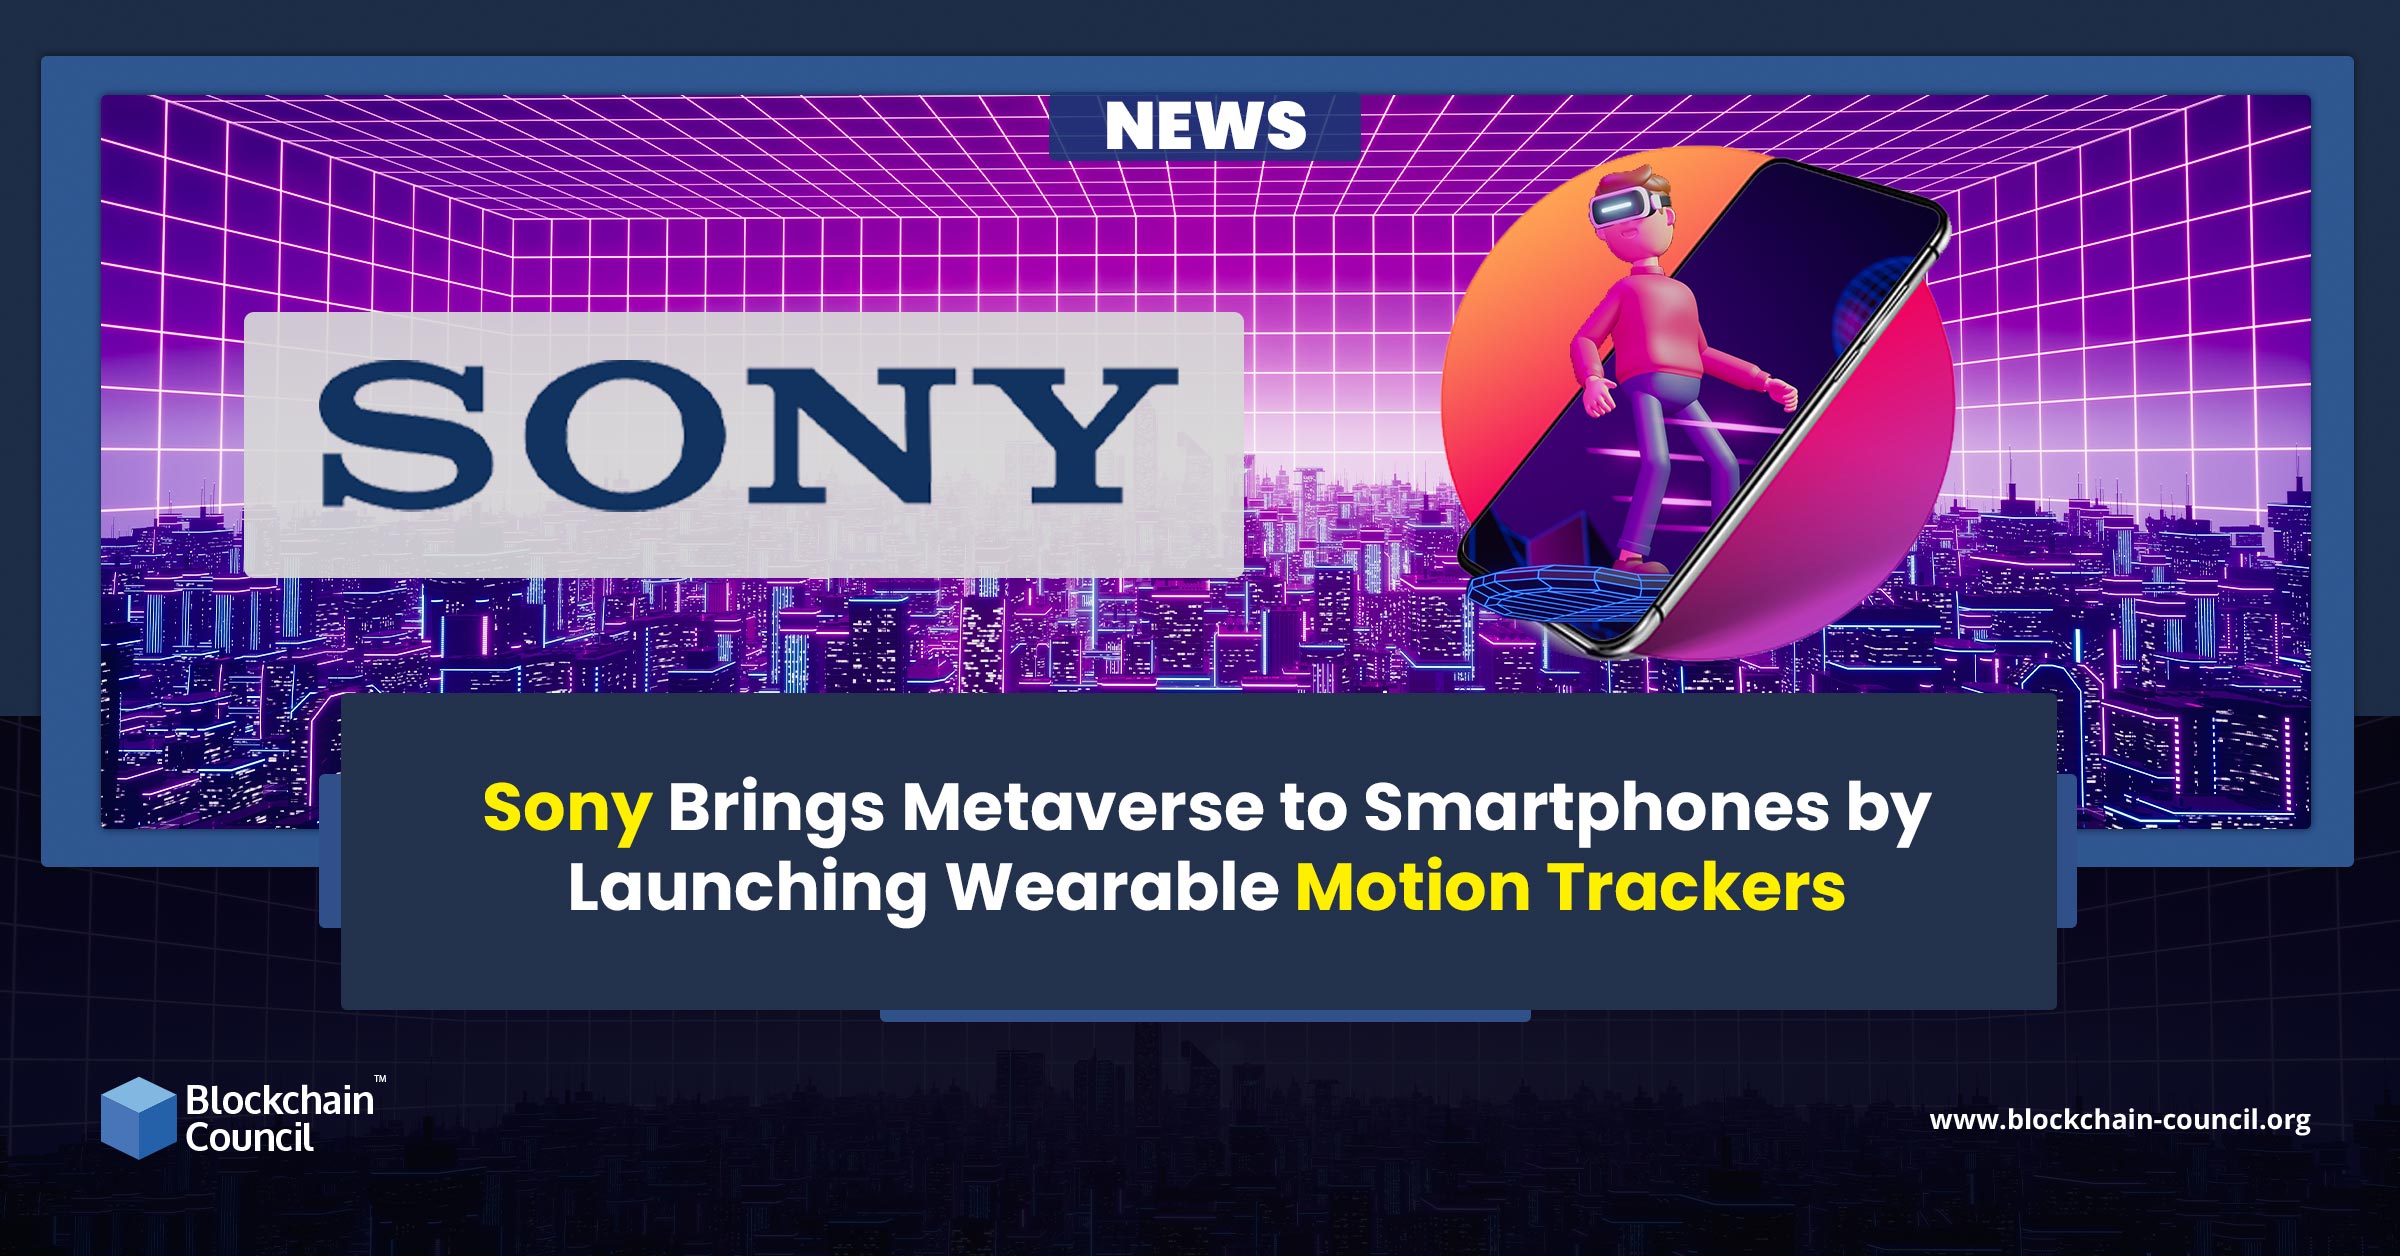 Sony Brings Metaverse to Smartphones by Launching Wearable Motion Trackers